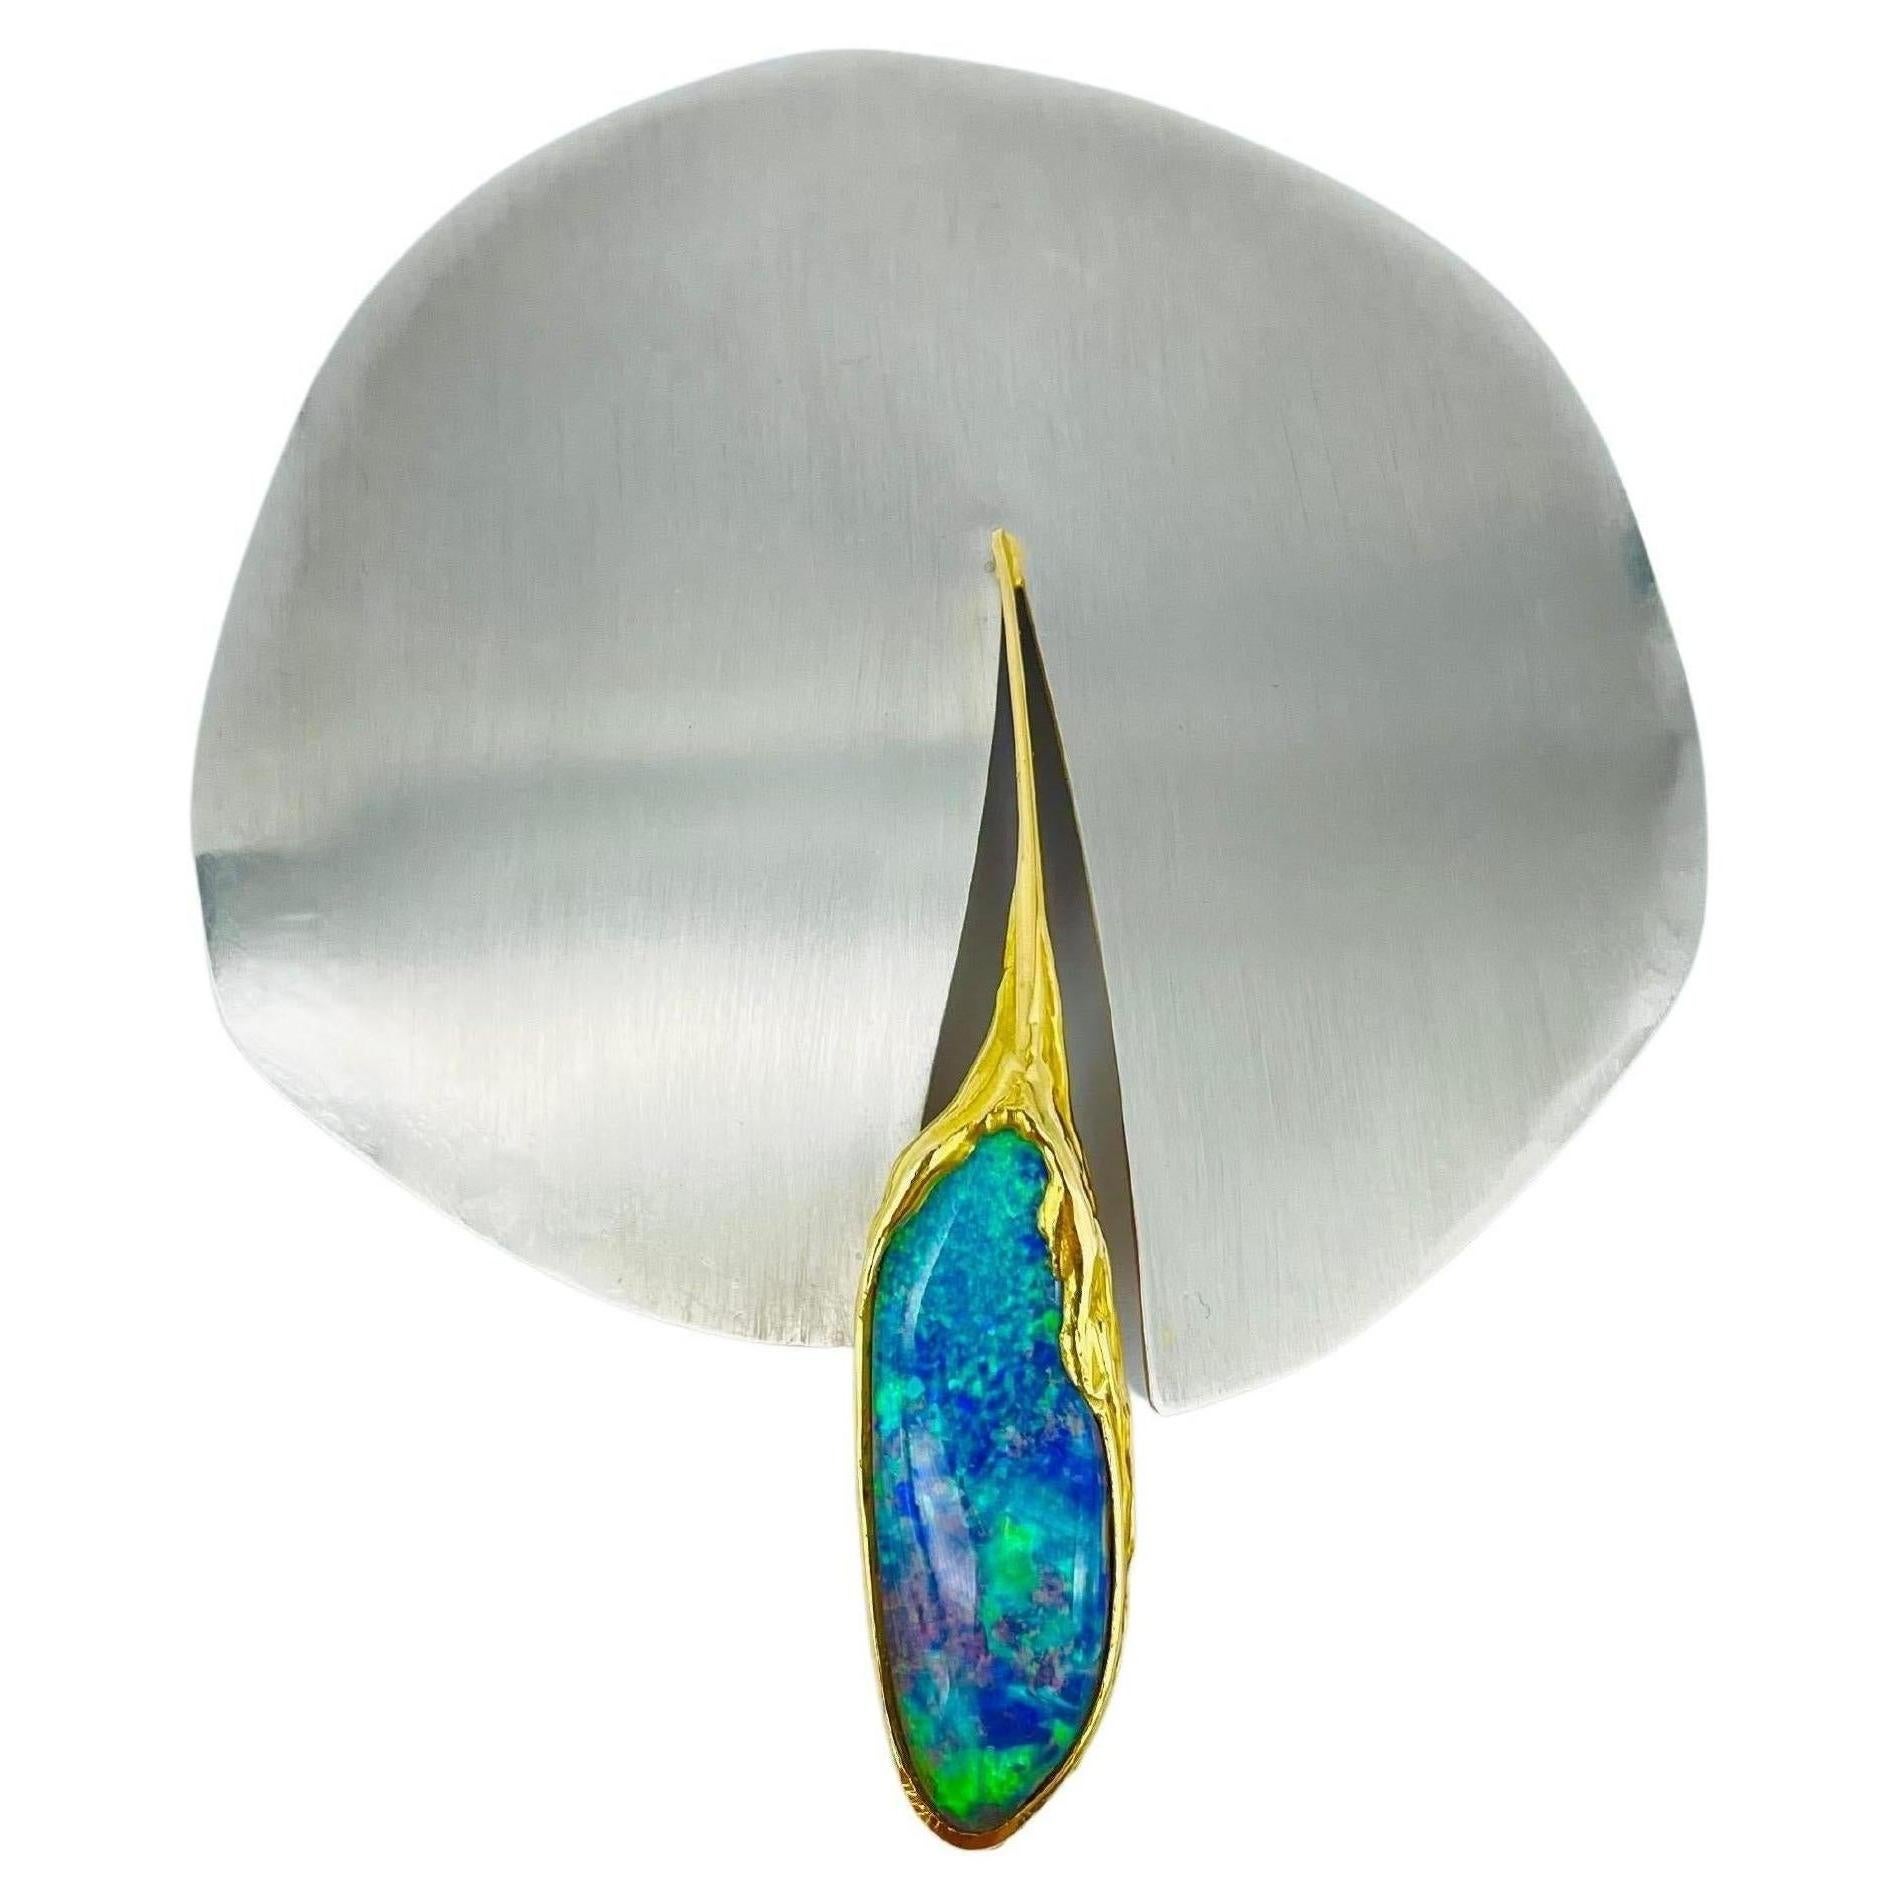 This breathtaking piece of jewelry is a true work of art. Made of exquisite 950 platinum and 18k yellow gold, this unique brooch-pendant is set with a stunning oval Australian opal that radiates a captivating play of colors. The opal is expertly cut